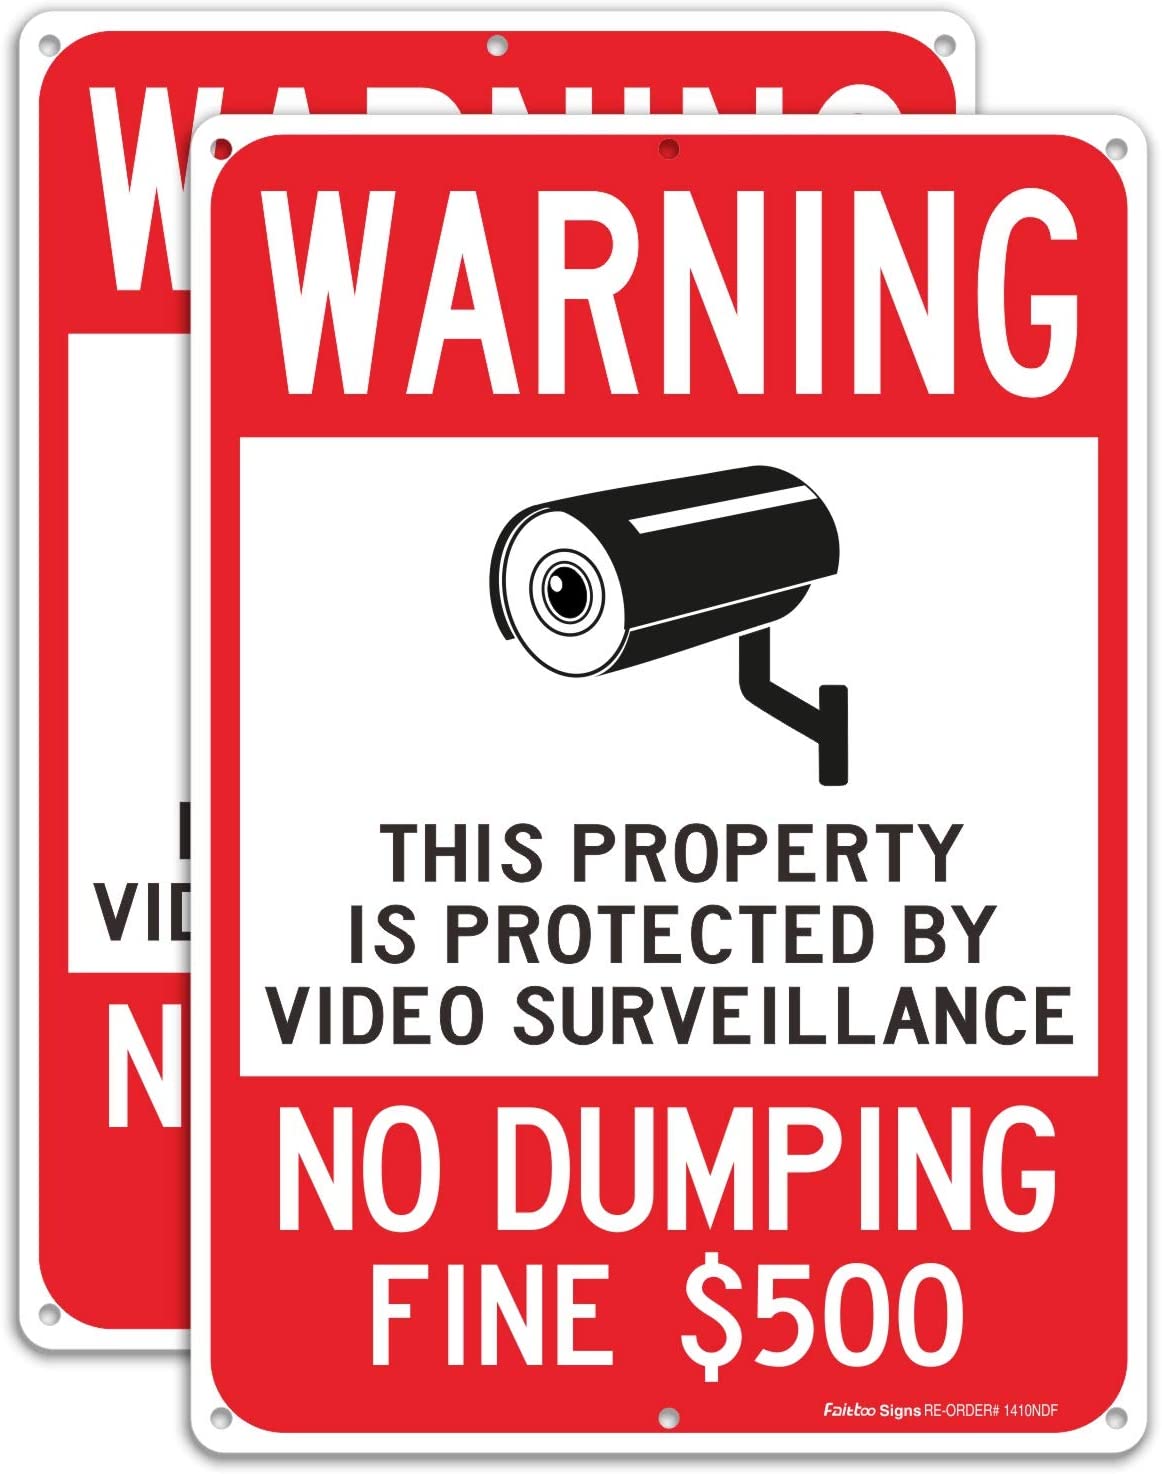 Warning No Dumping, Fine $500, Property Protected by Video Surveillance Sign, 14 x 10 Inches .040 Rust-Free Aluminum , UV Protected, Weather Resistant, Waterproof, Durable Ink, Easy to Mount